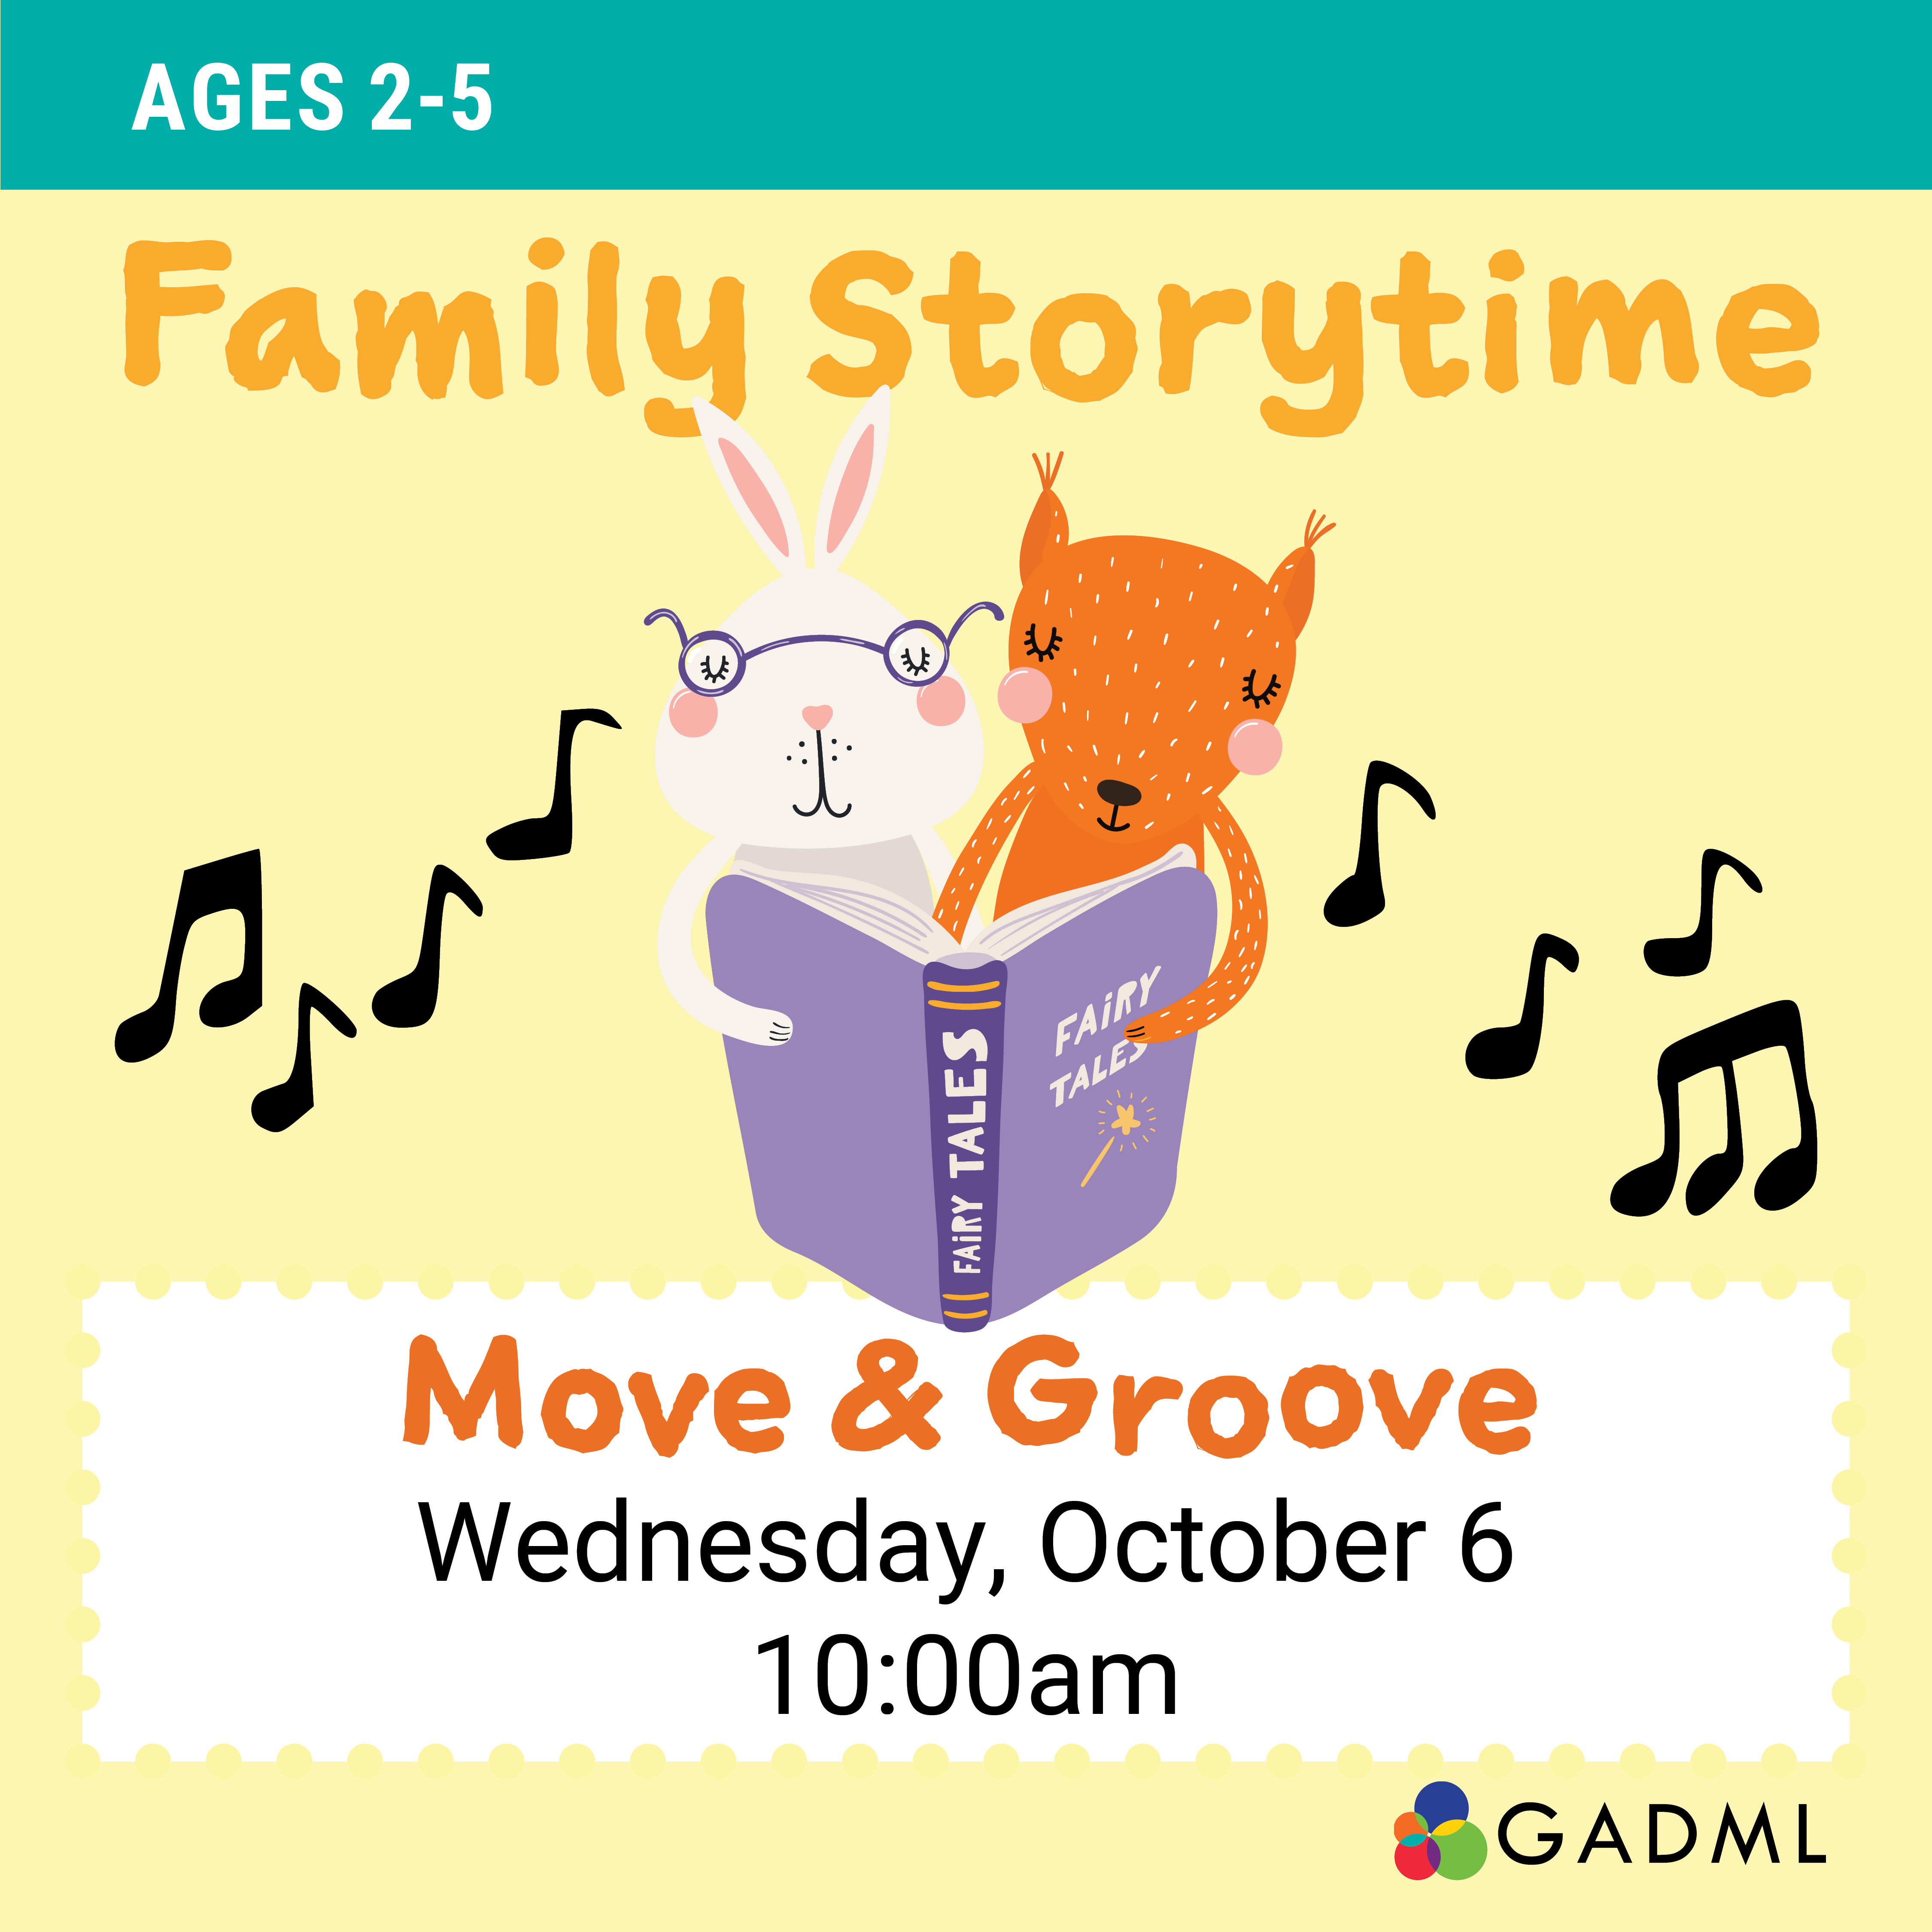 Move & Groove Wednesday, October 6 at 10:00 AM